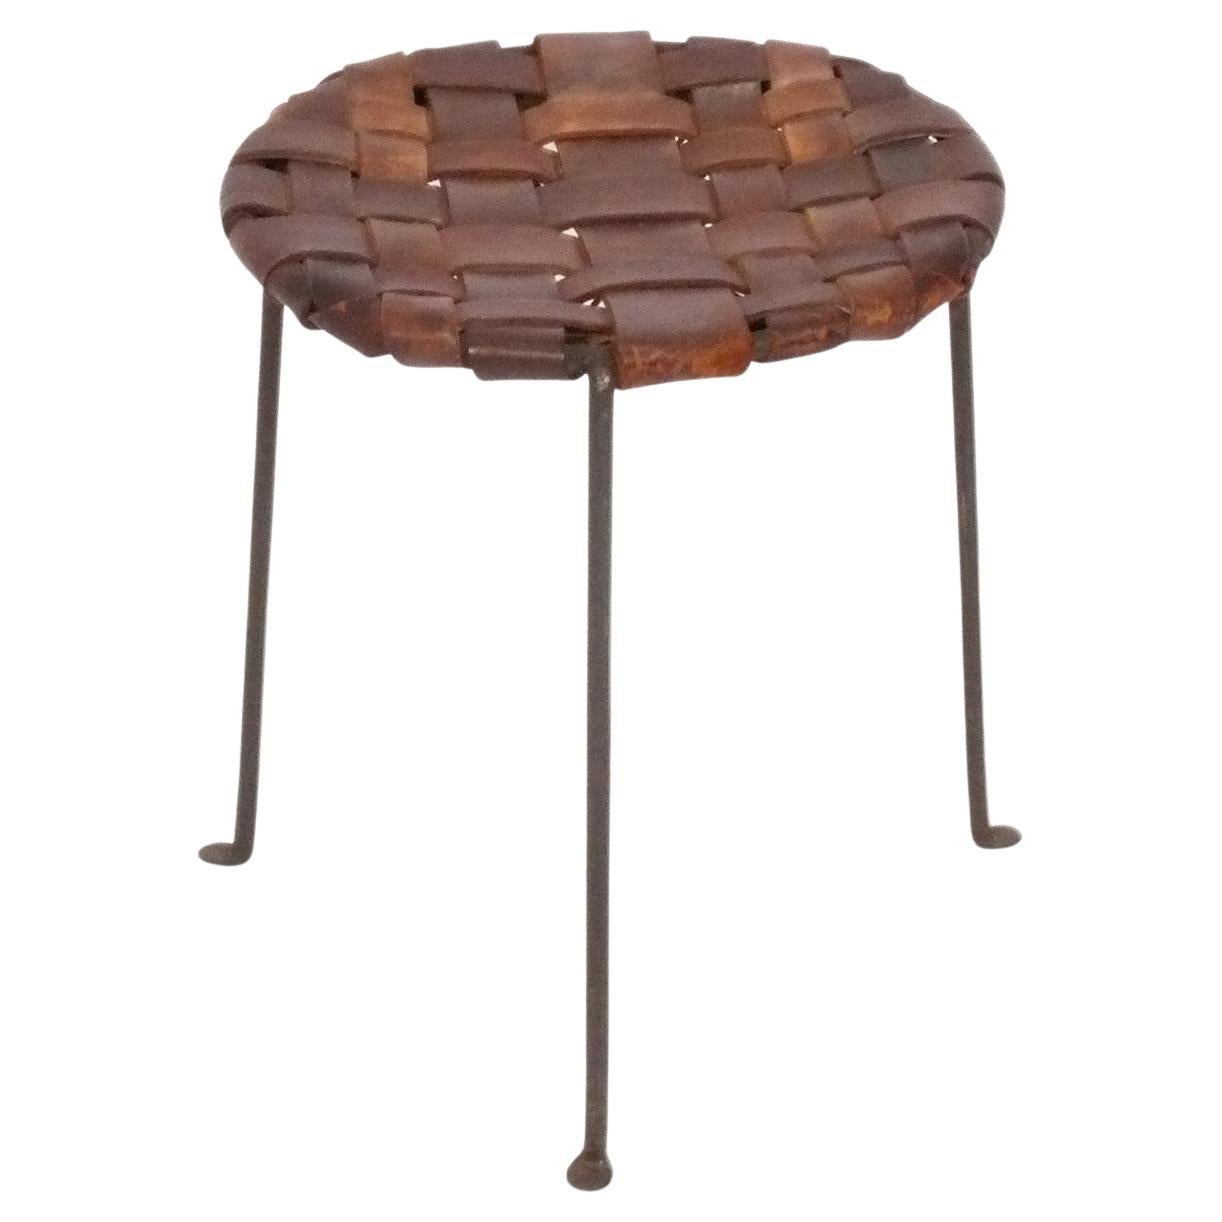 Studio Craft Woven Leather and Iron Stool by Lila Swift and Donald Monell